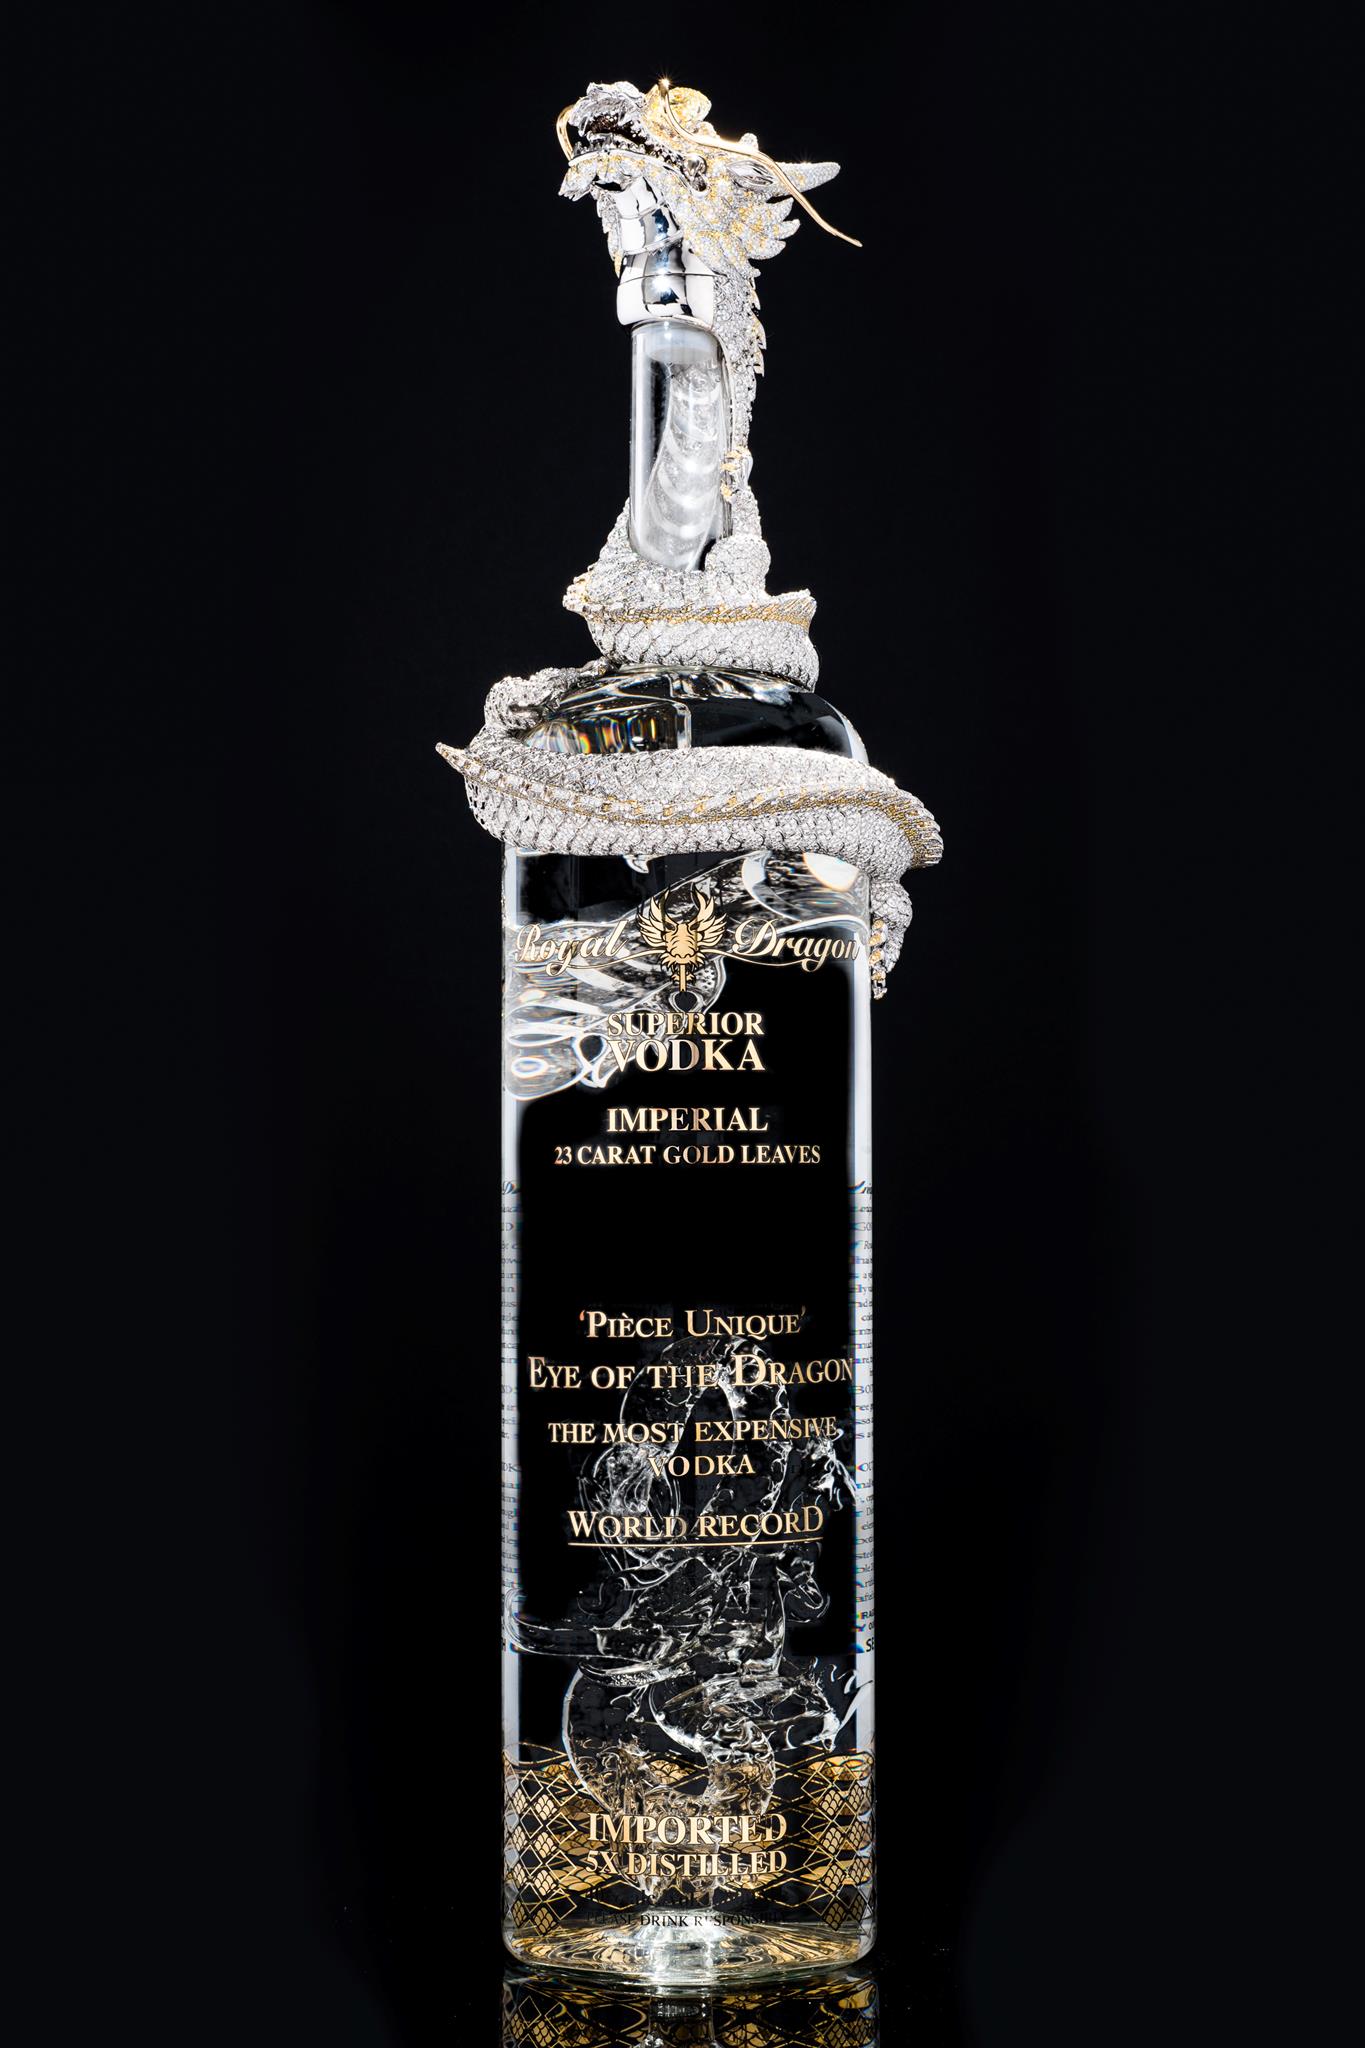 Seems legit: The most expensive vodka in the world  Prestige Online ...